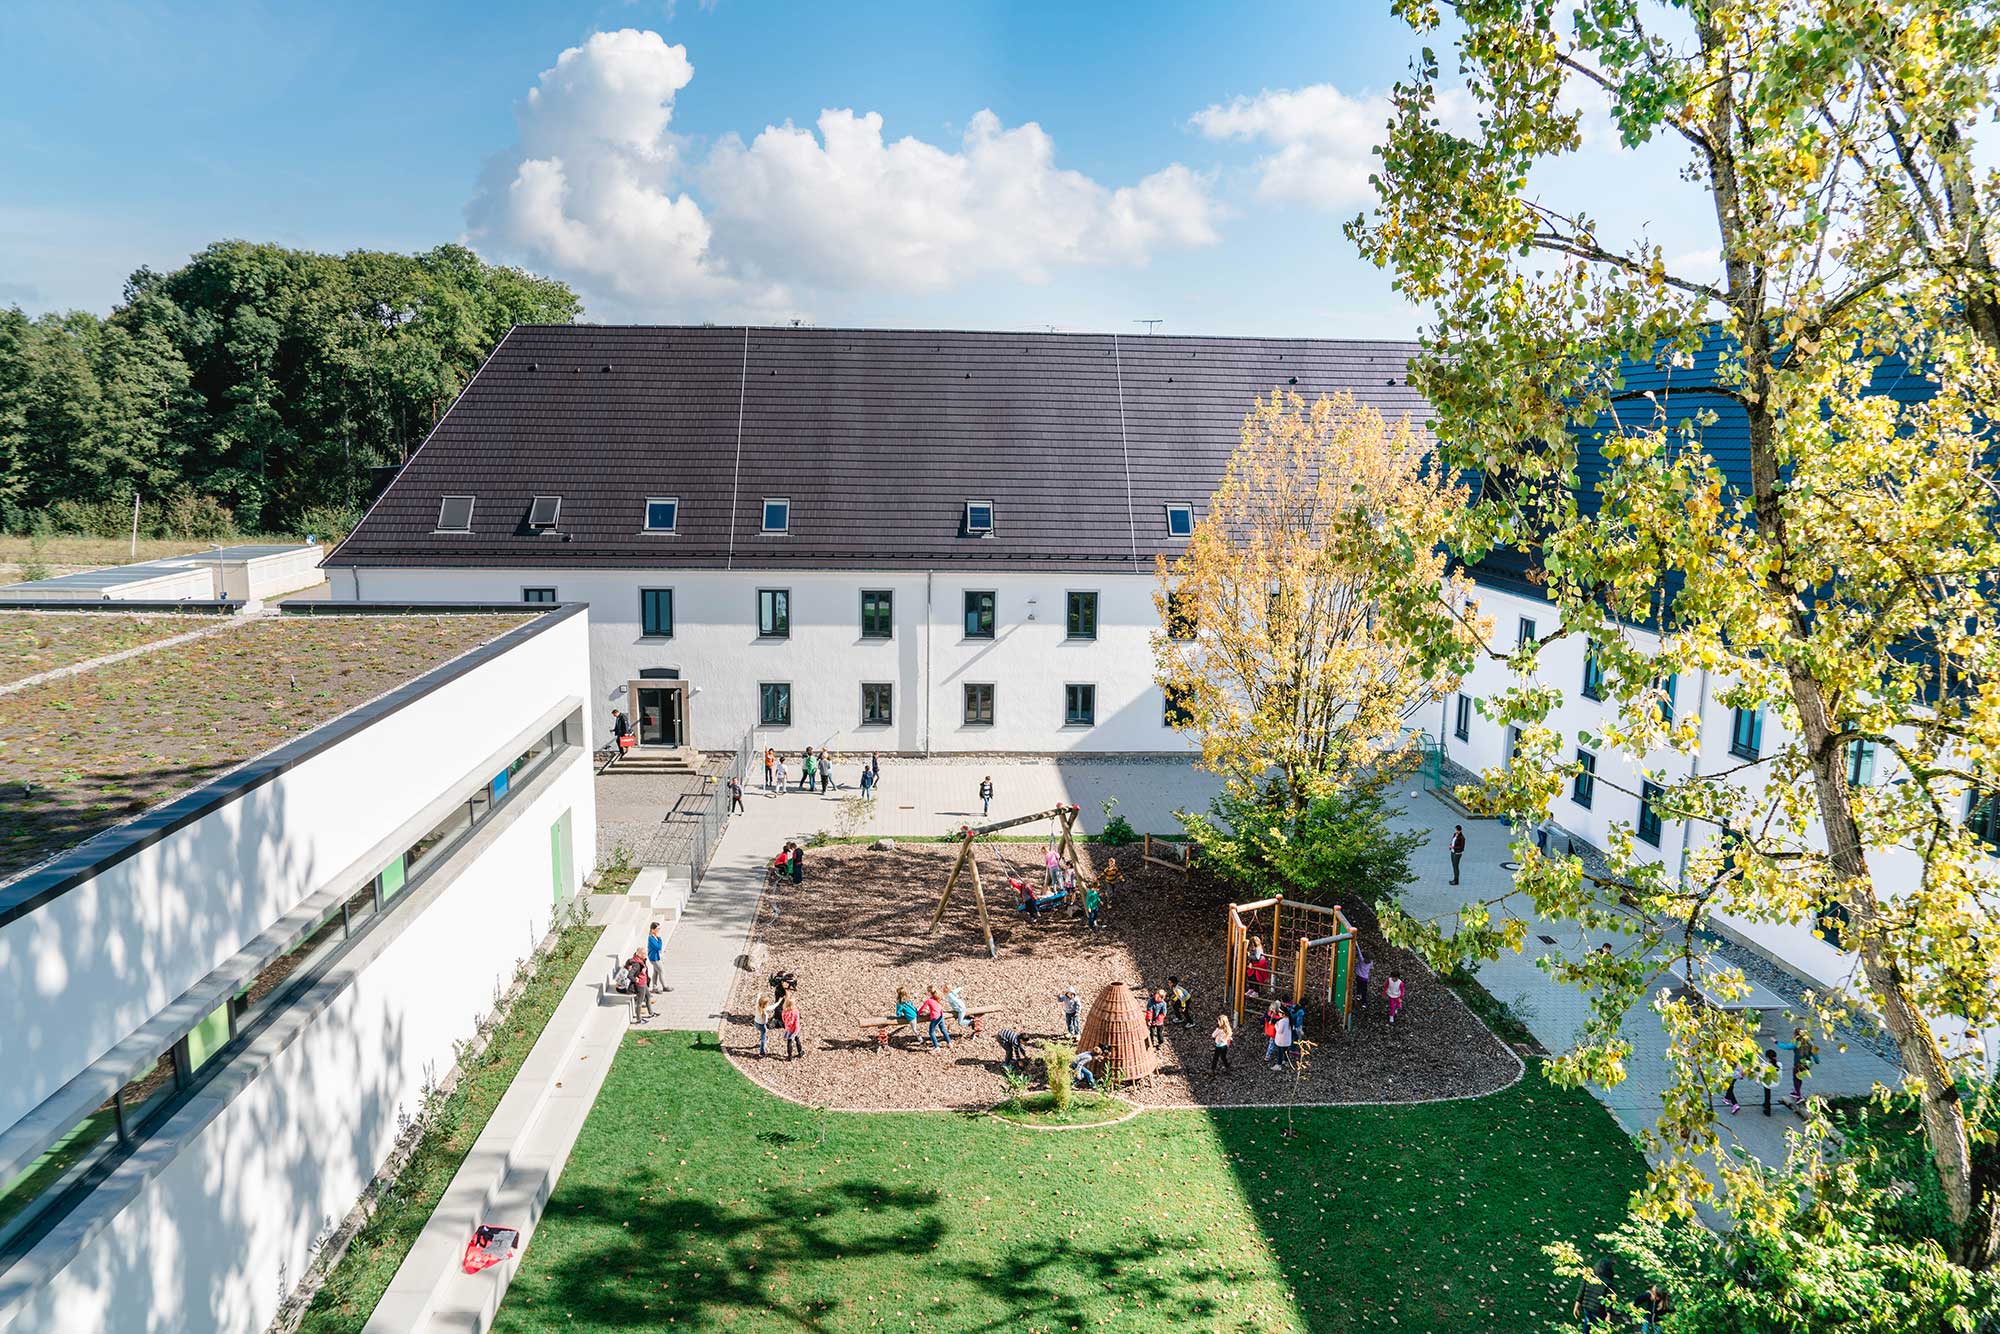 The school building with an inviting playground where children are having fun.